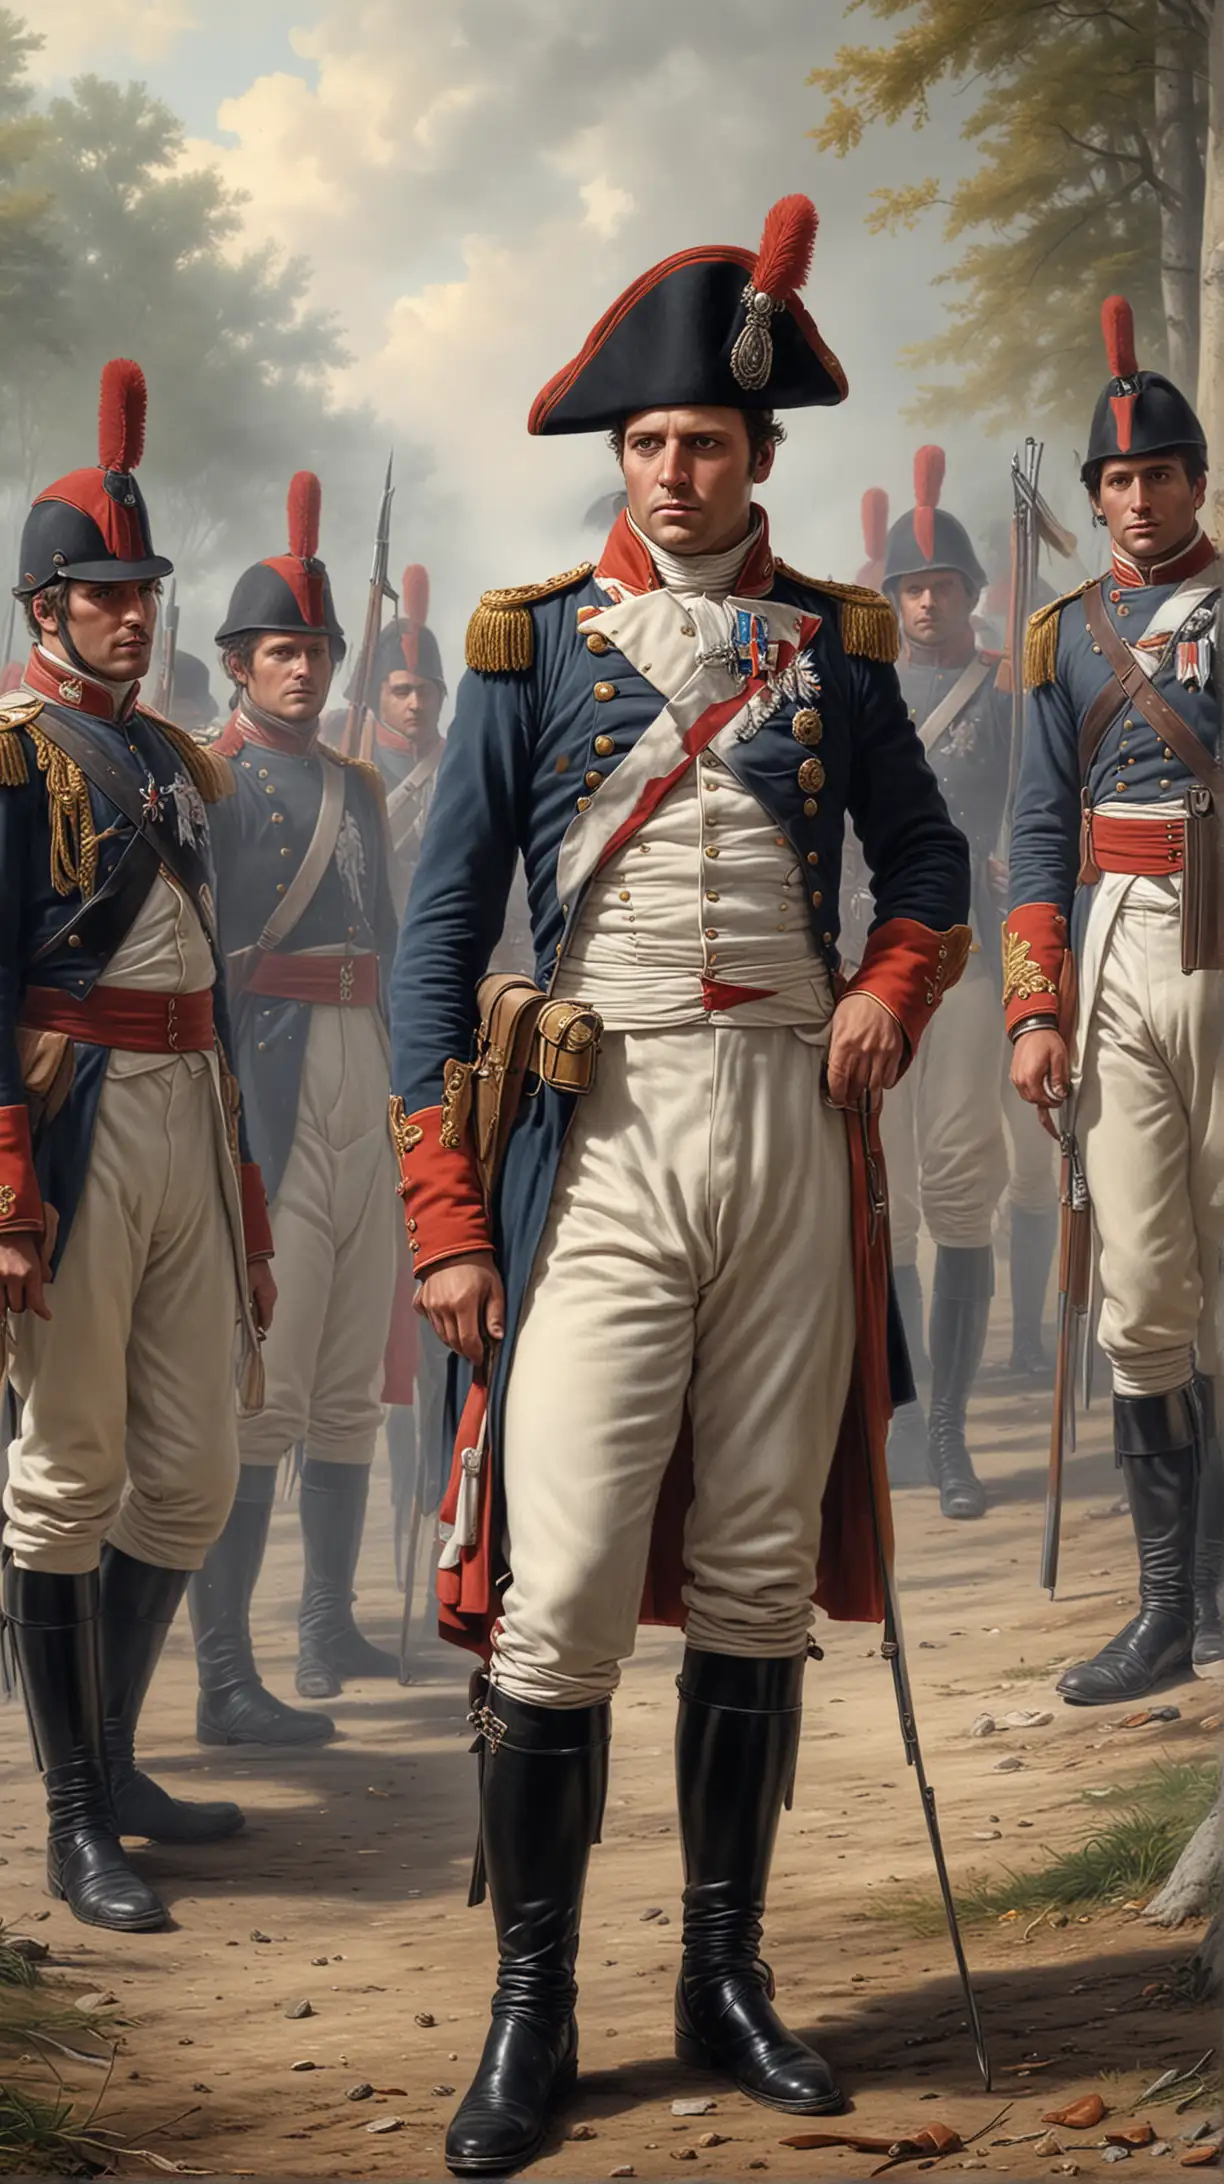 Napoleon Bonaparte Leading Swiss Soldiers in Hyper Realistic Painting